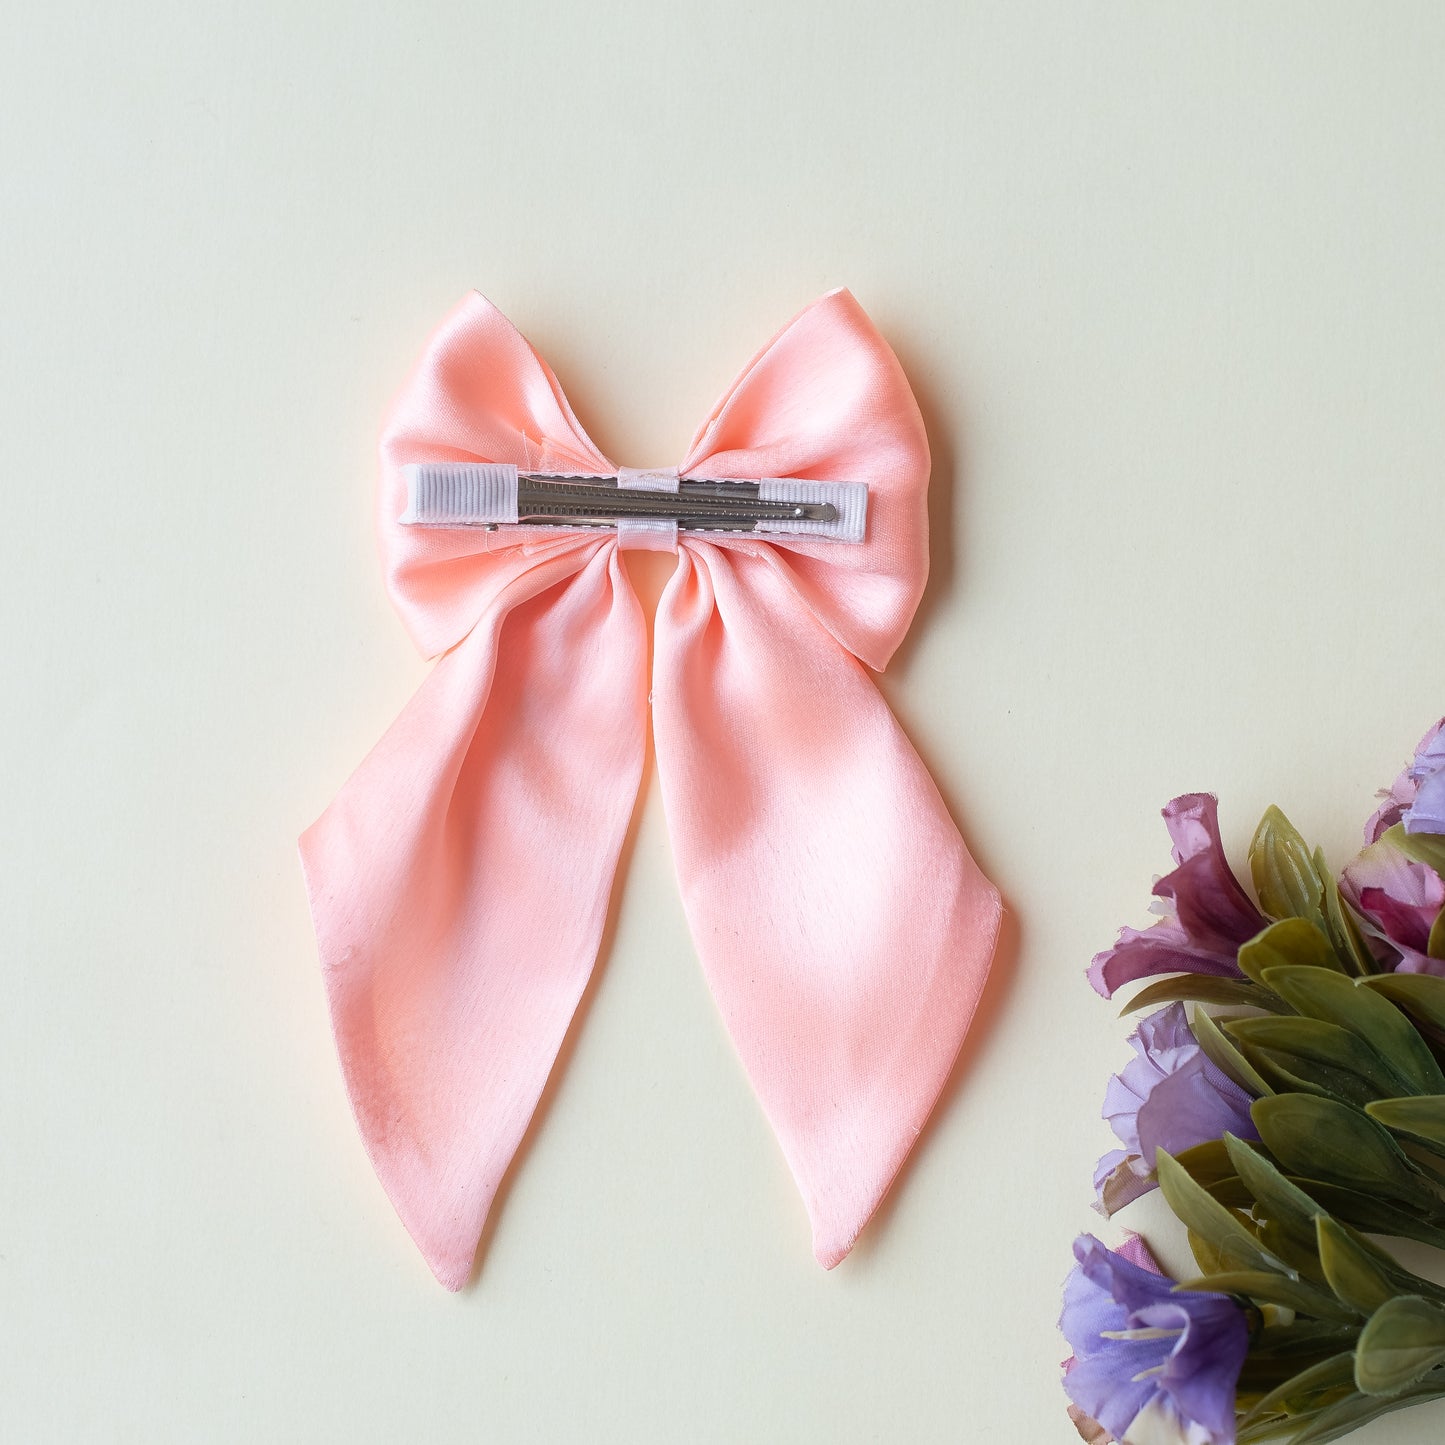 Big fancy satin bow on alligator clip embellished with pearls - Peach